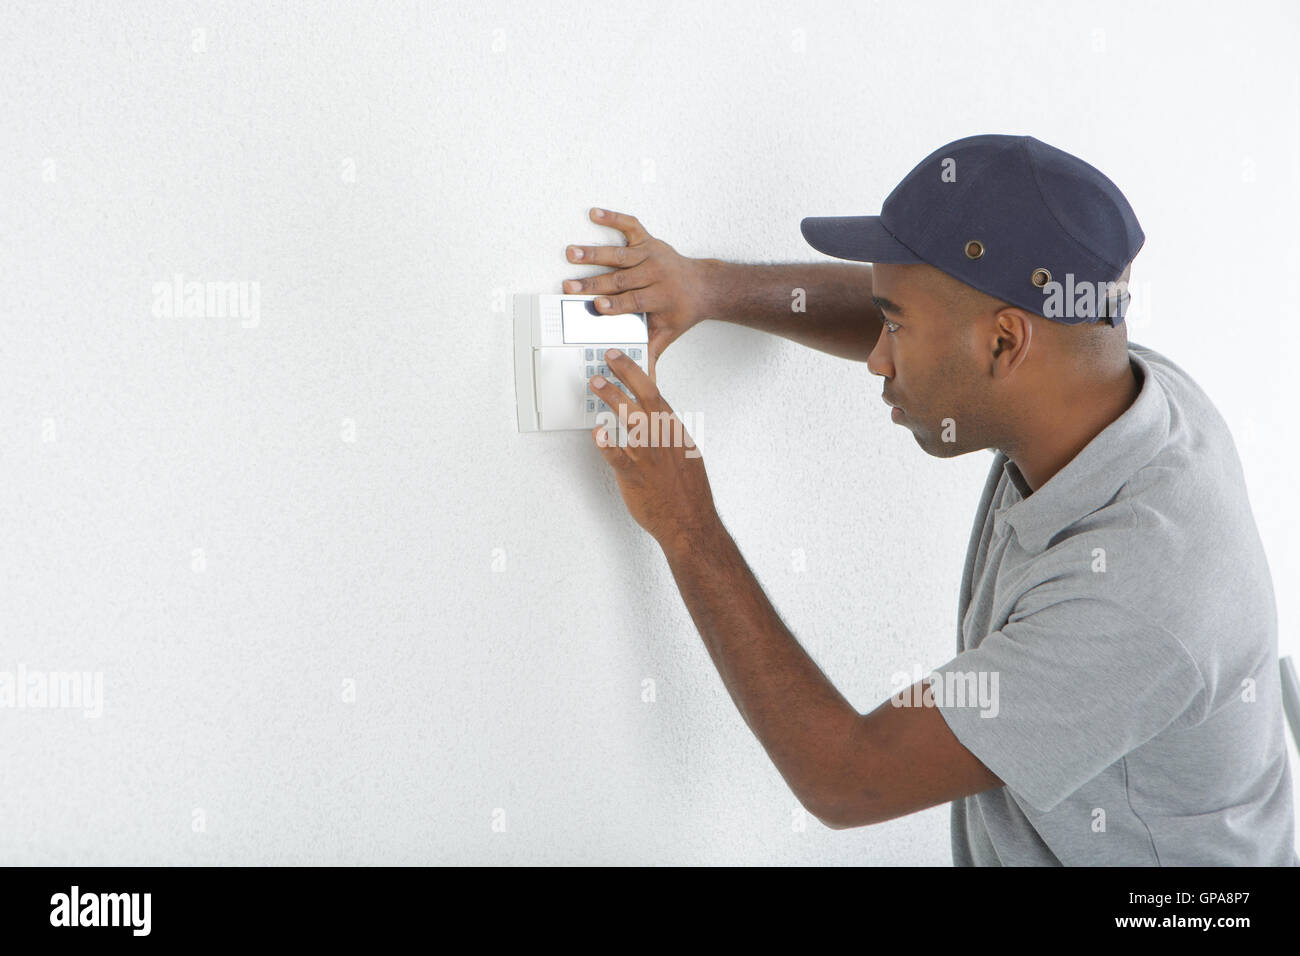 Man fitting switch to wall Stock Photo